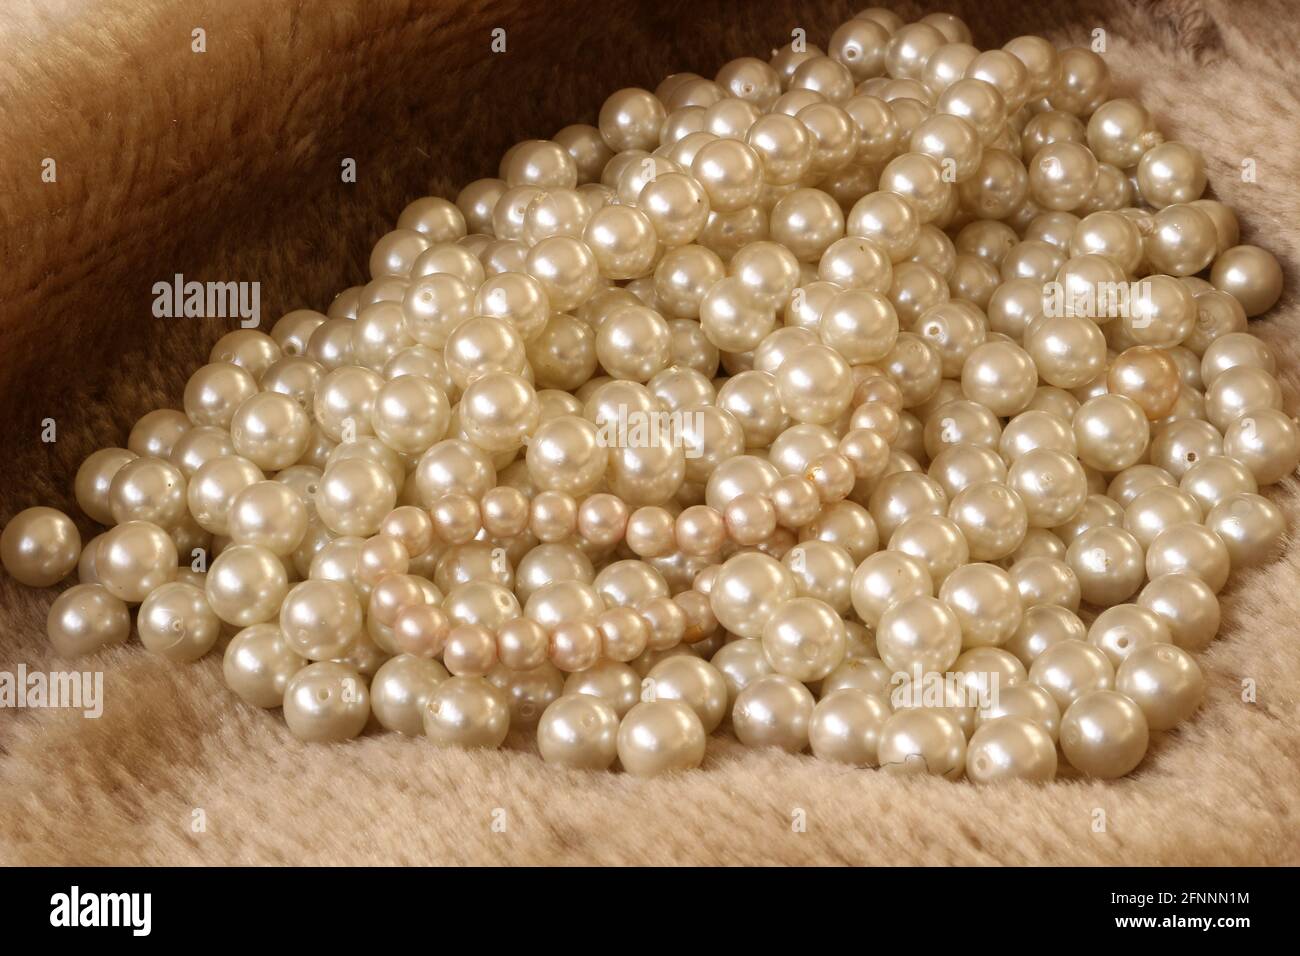 White pearls on fur background Stock Photo